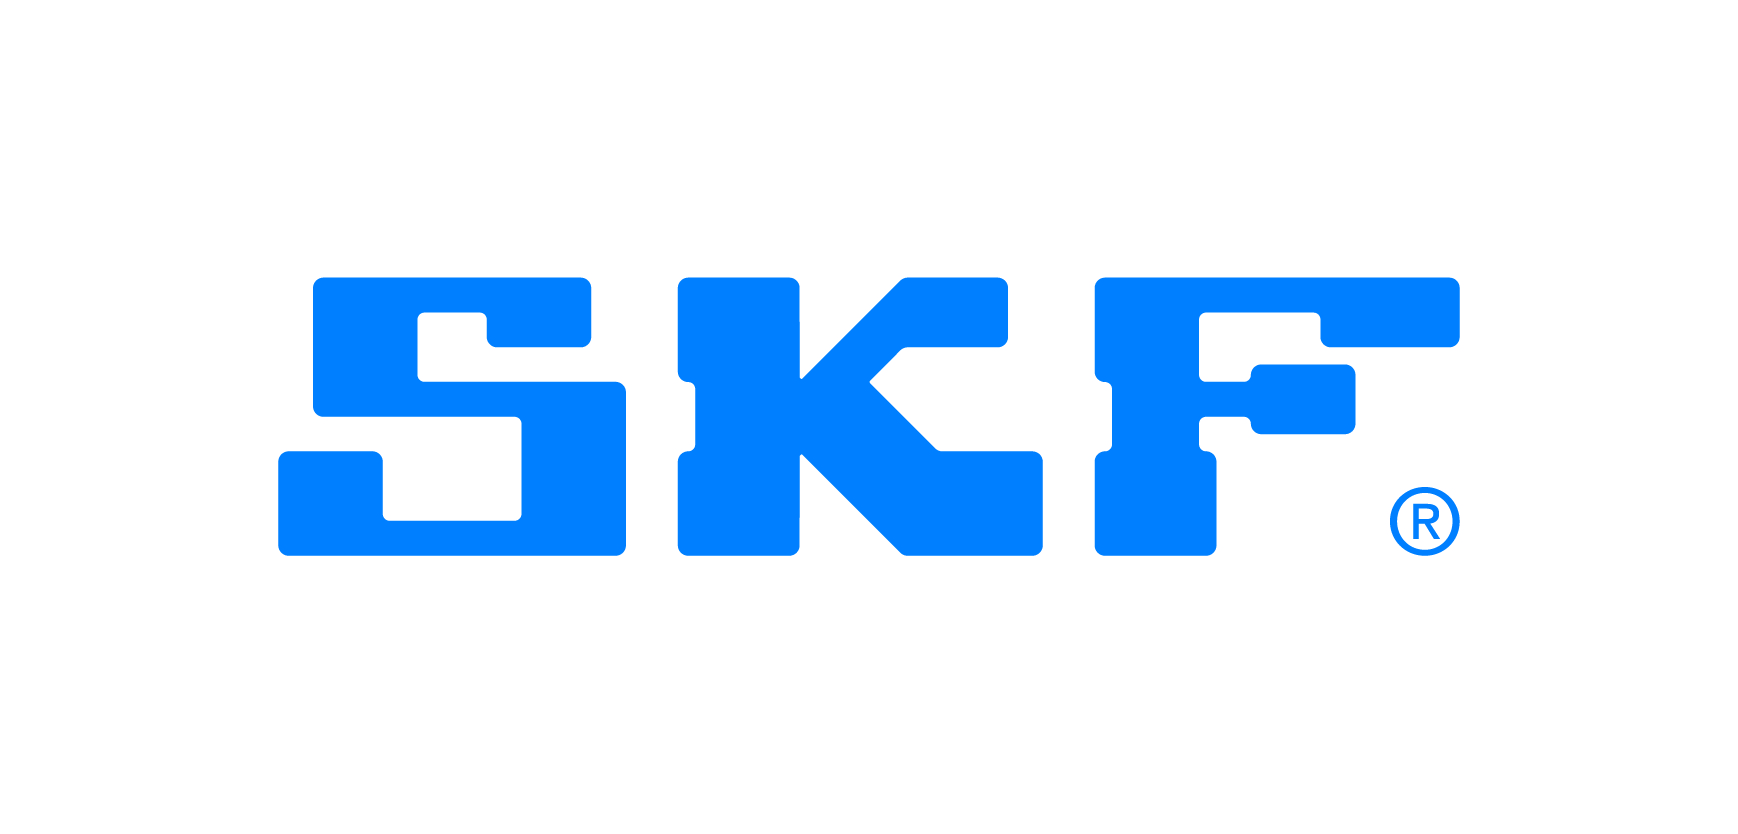 SKF Joins NASCAR as a Competition Partner | THE SHOP